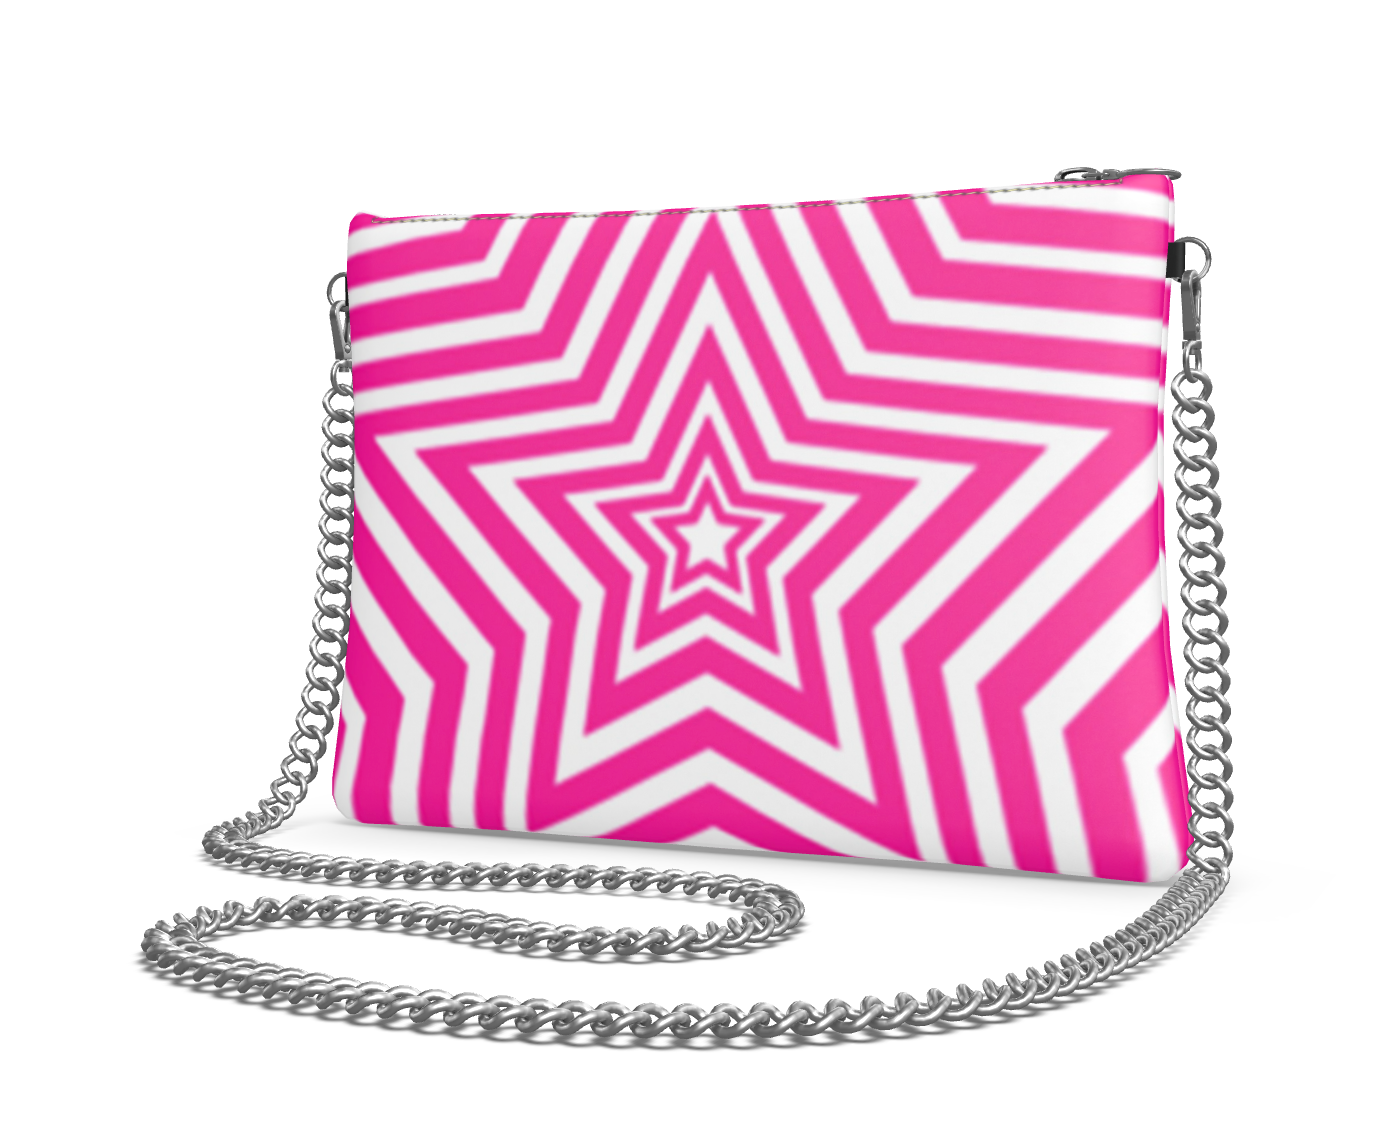 UNTITLED BOUTIQUE Pink and White Leather Star Crossbody Bag with Silver Chain - Limited Edition